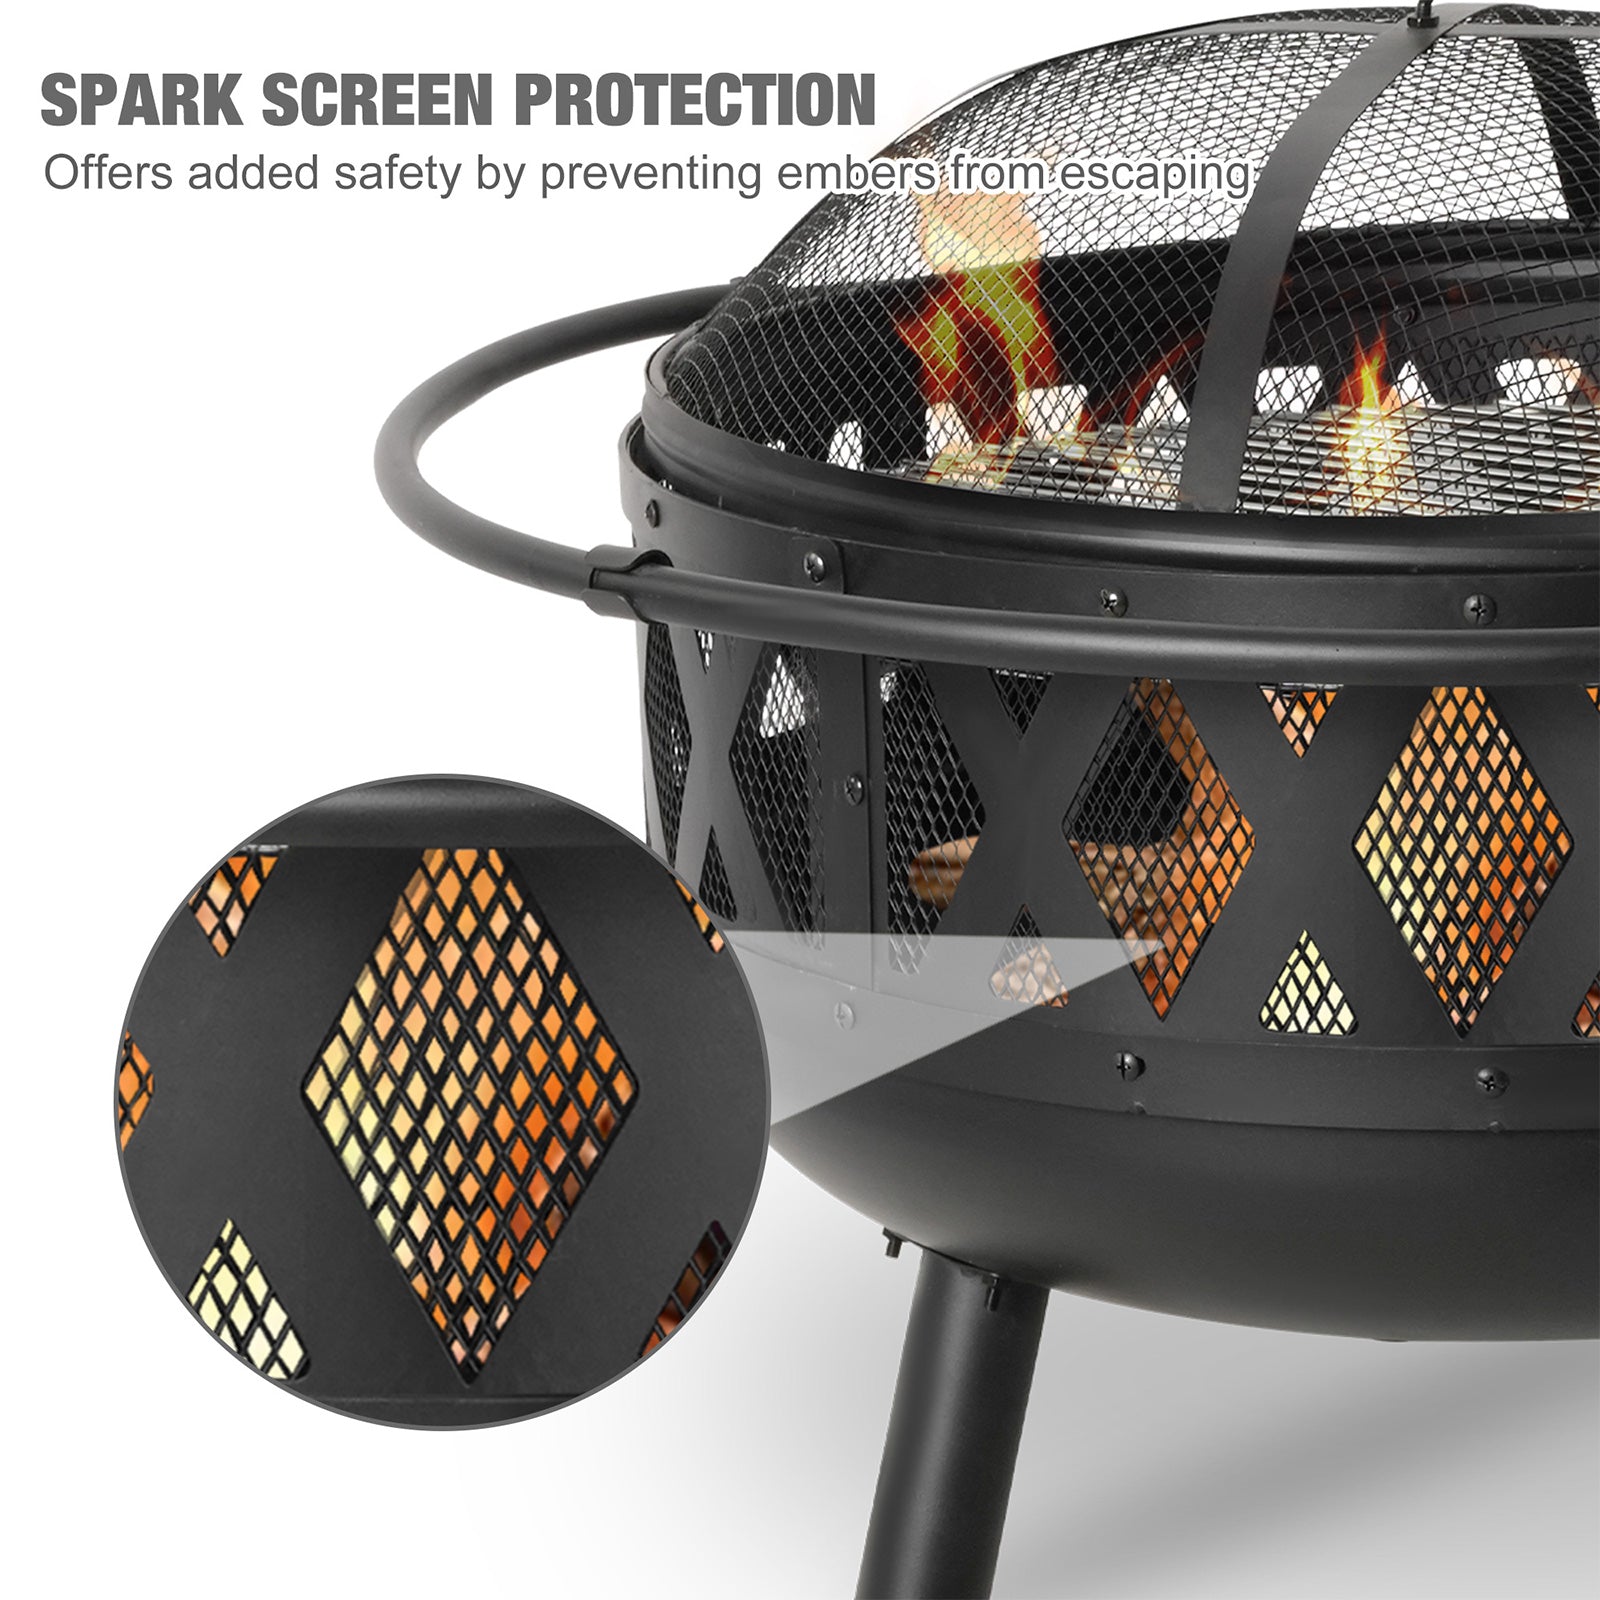 Round Outdoor Wood Burning Fire Pit 22.8" with Steel BBQ Grill, Spark Screen and Poker